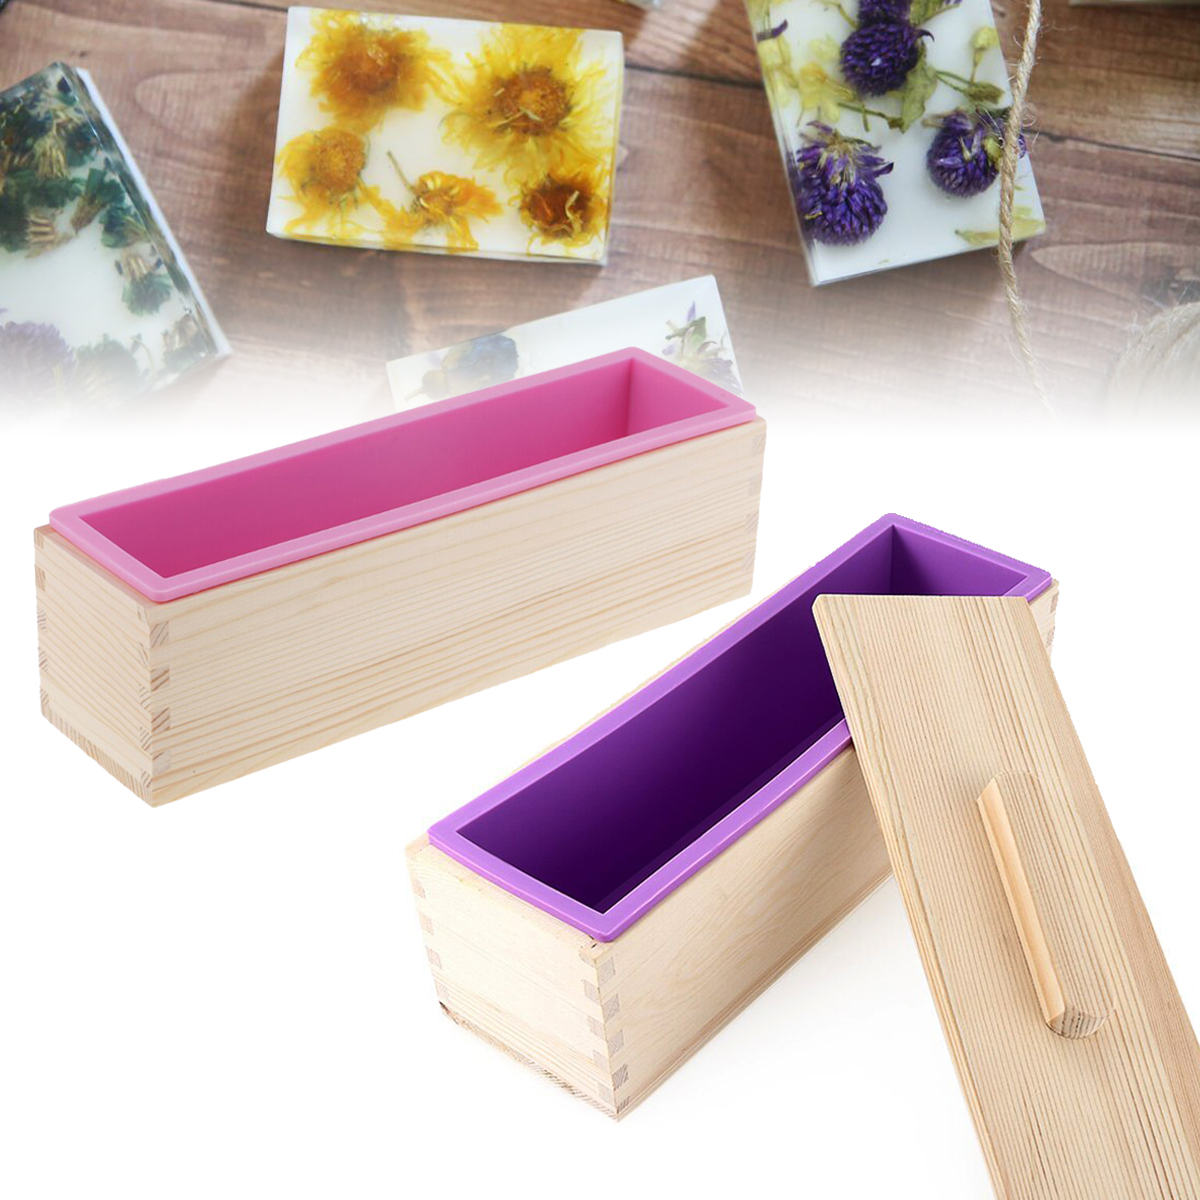 New-Wood-Loaf-Soap-Mould-with-Silicone-Mold-Cake-Making-Wooden-Box-Soap-1602226-3